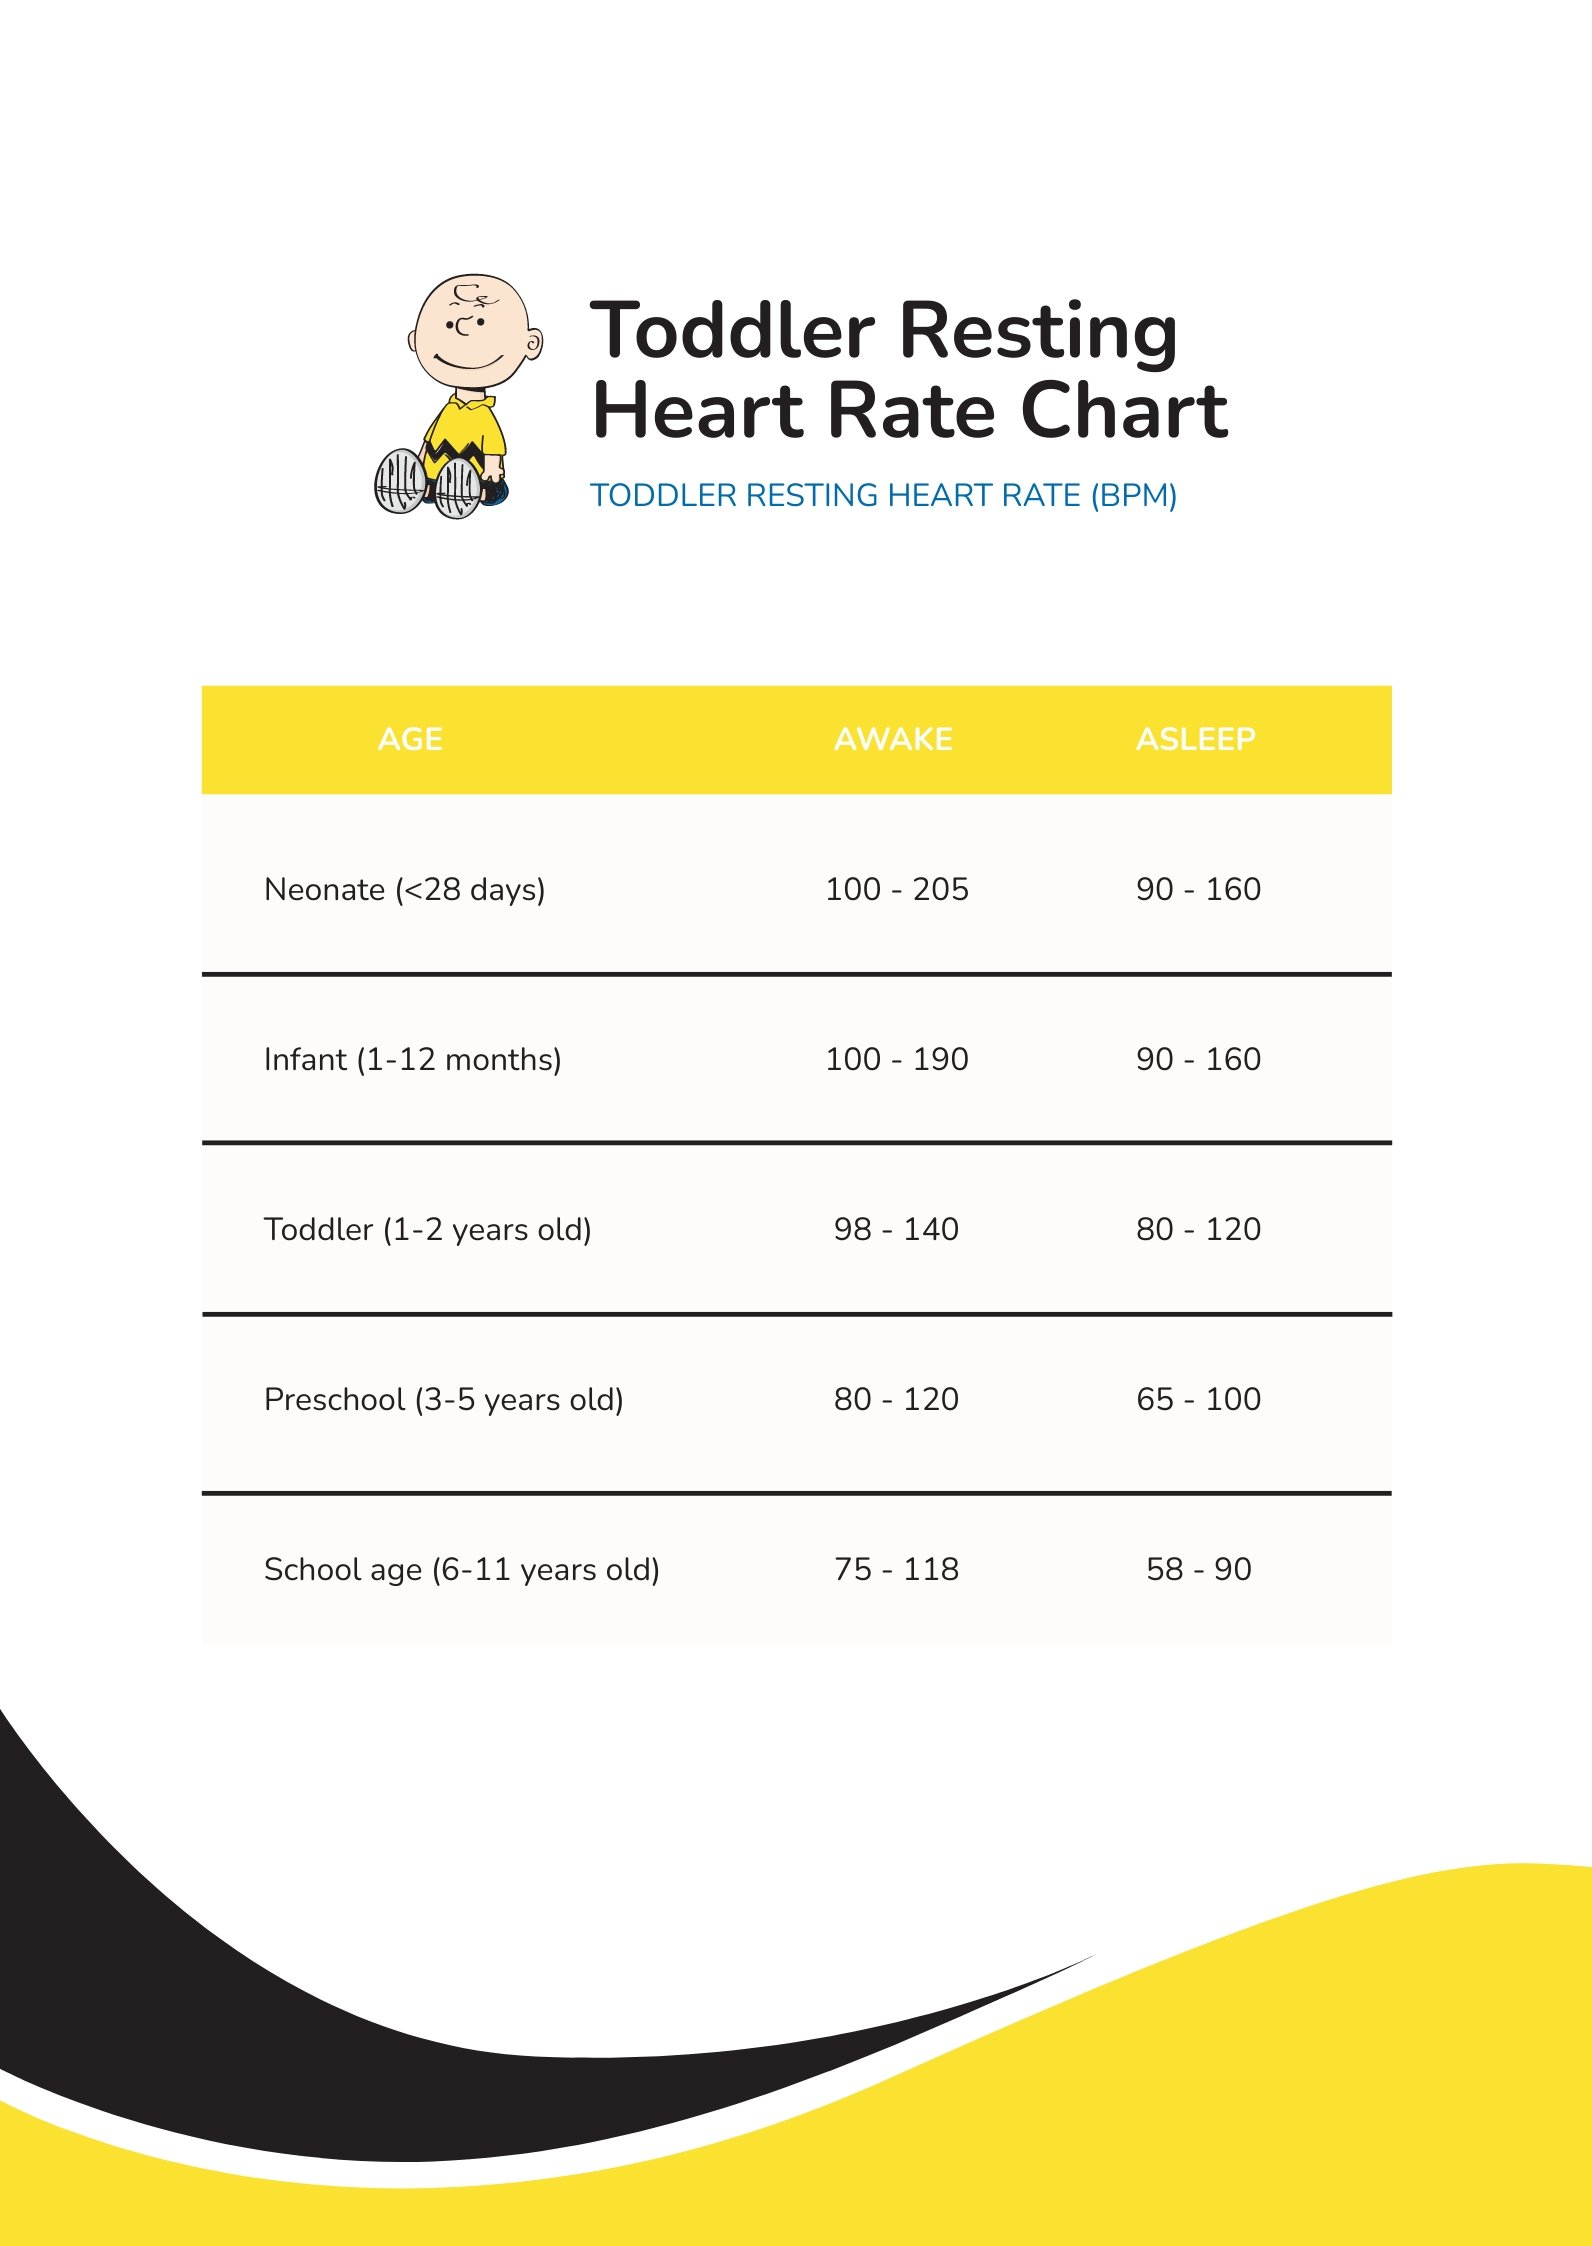 Toddler Resting Heart Rate Chart in PDF